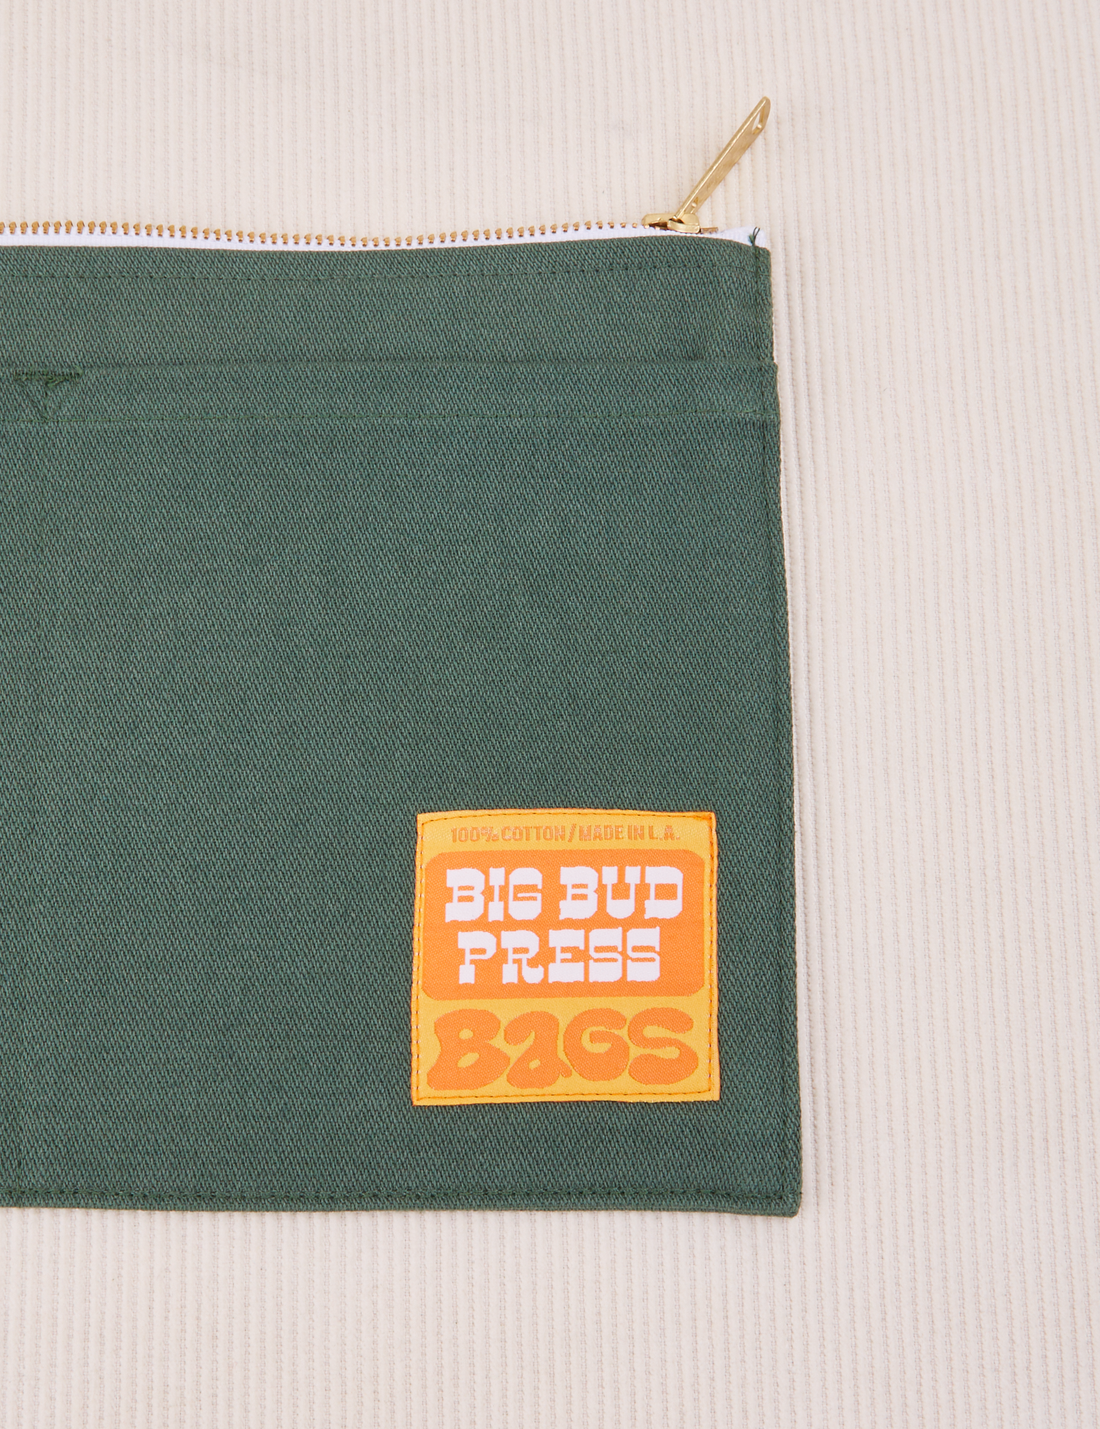 Big Pouch in Dark Emerald green with Big Bud Press label in orange and yellow